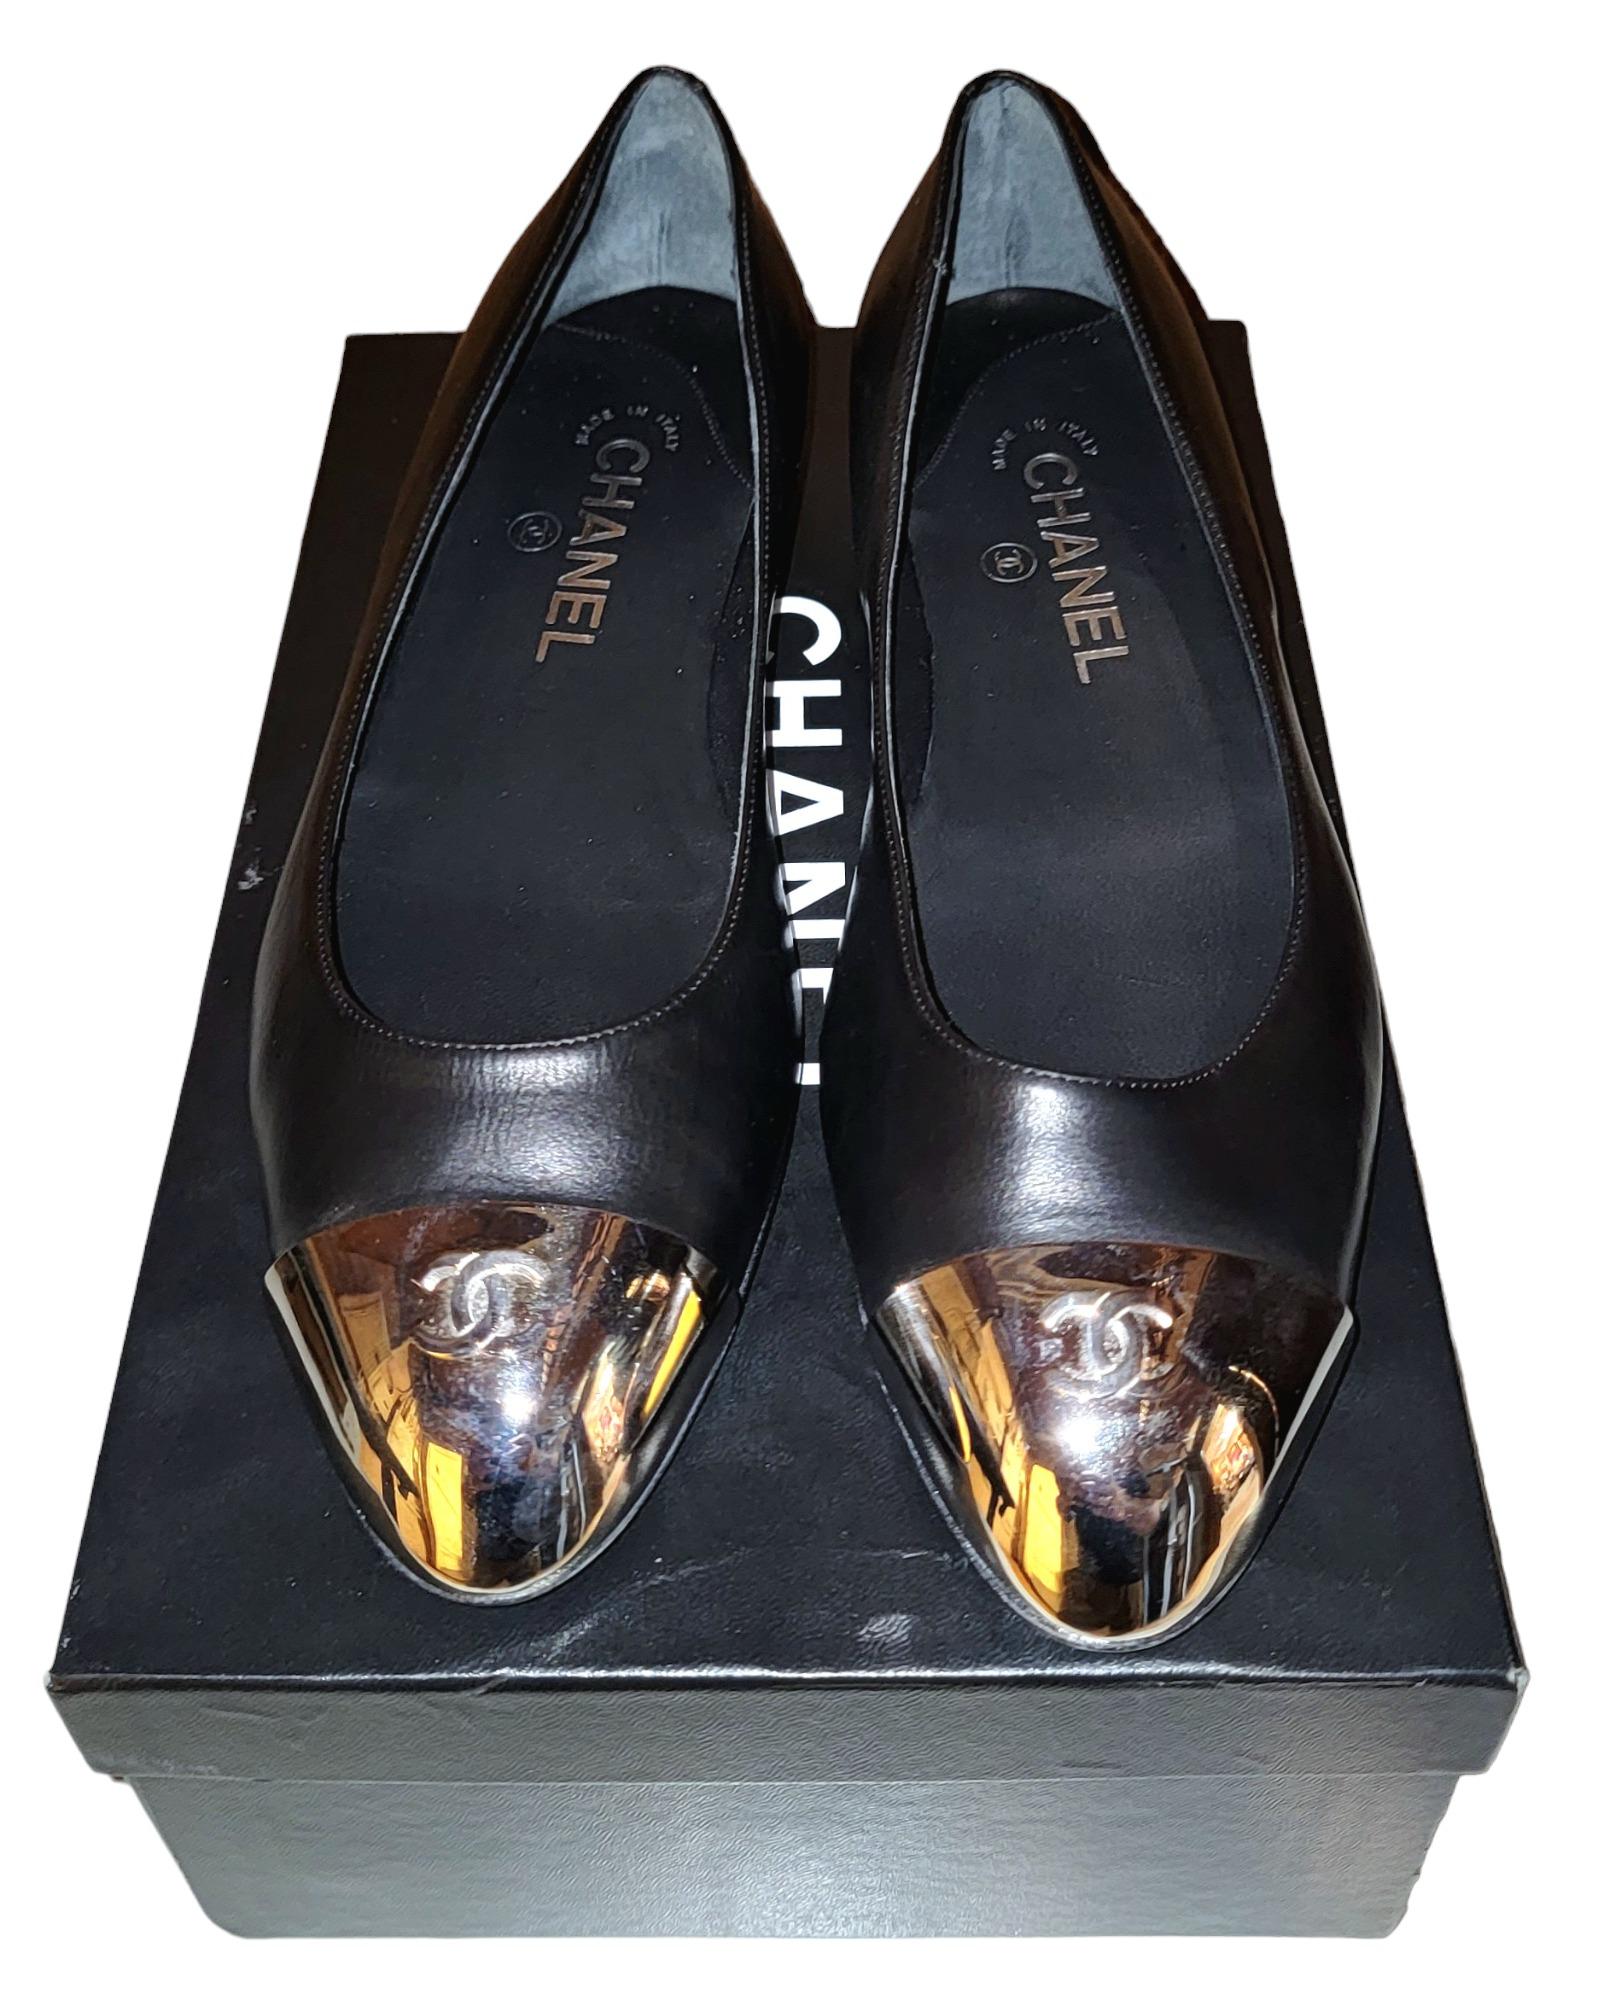 Black Rare Barnd New Ballerina Shoes With CC Chrome Accent For Sale